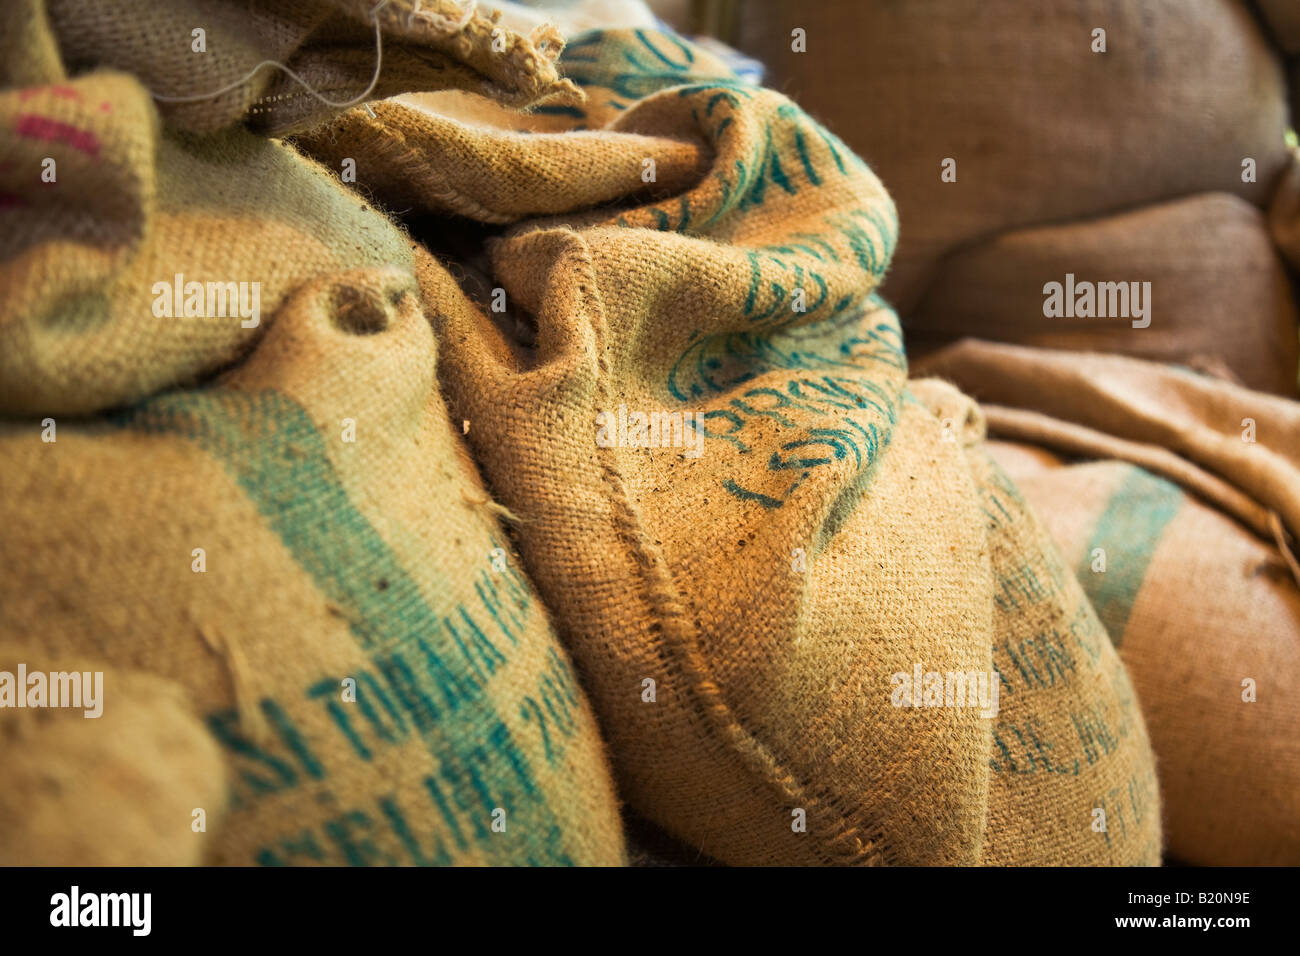 ILLINOIS Riverwoods Burlap bag with green coffee beans Name and origin stencil on side of sack Stock Photo